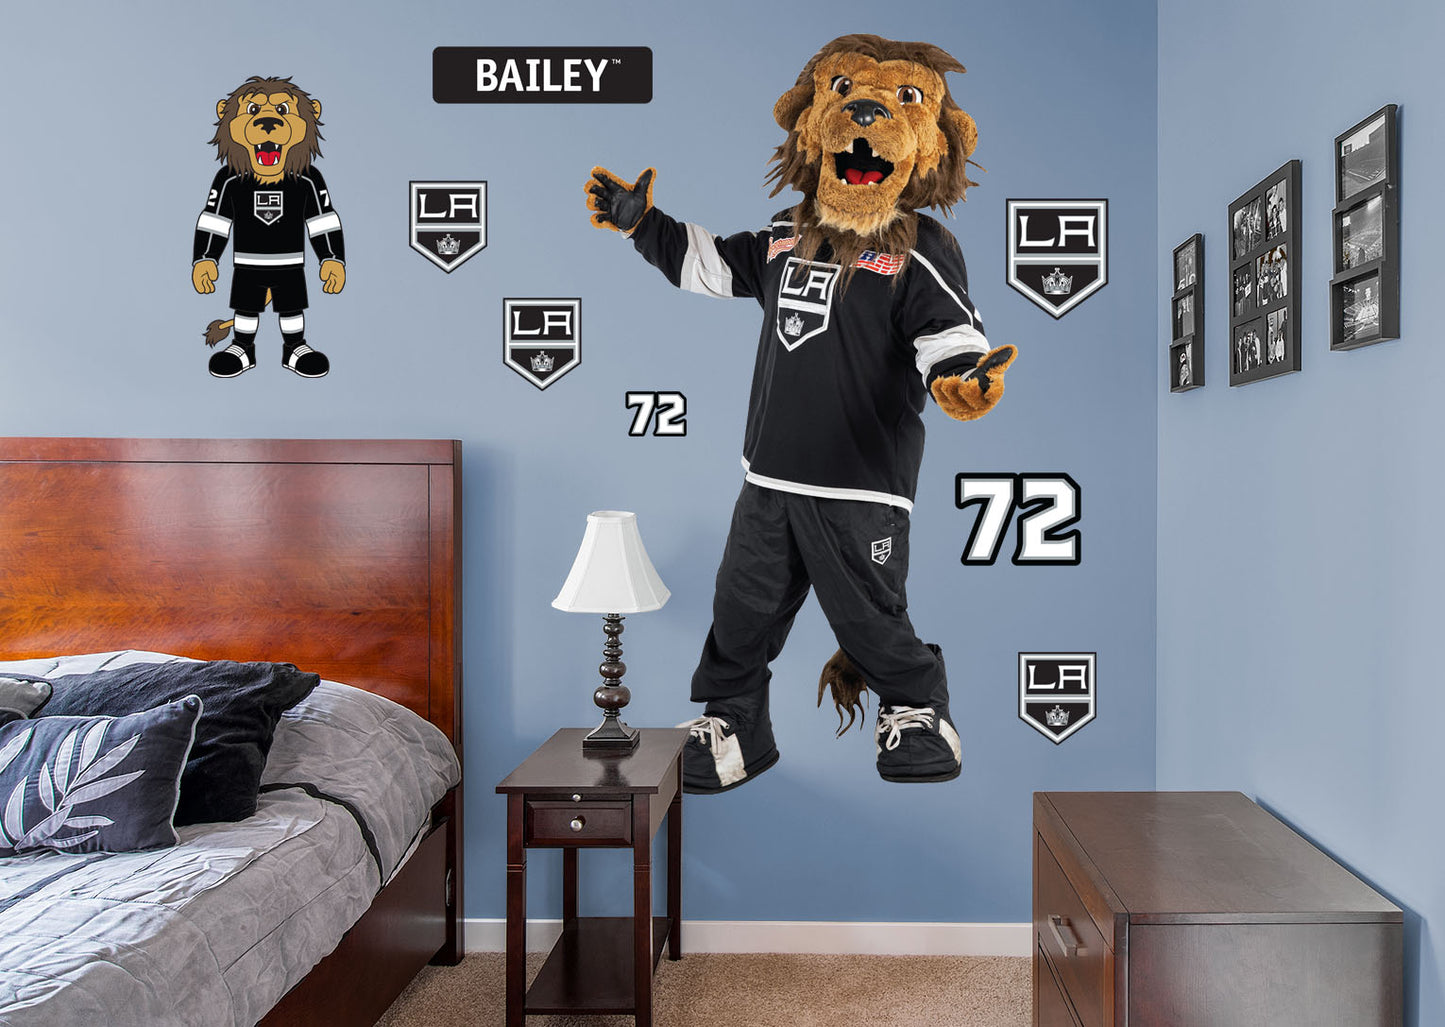 Los Angeles Kings: Bailey 2021 Mascot - Officially Licensed NHL